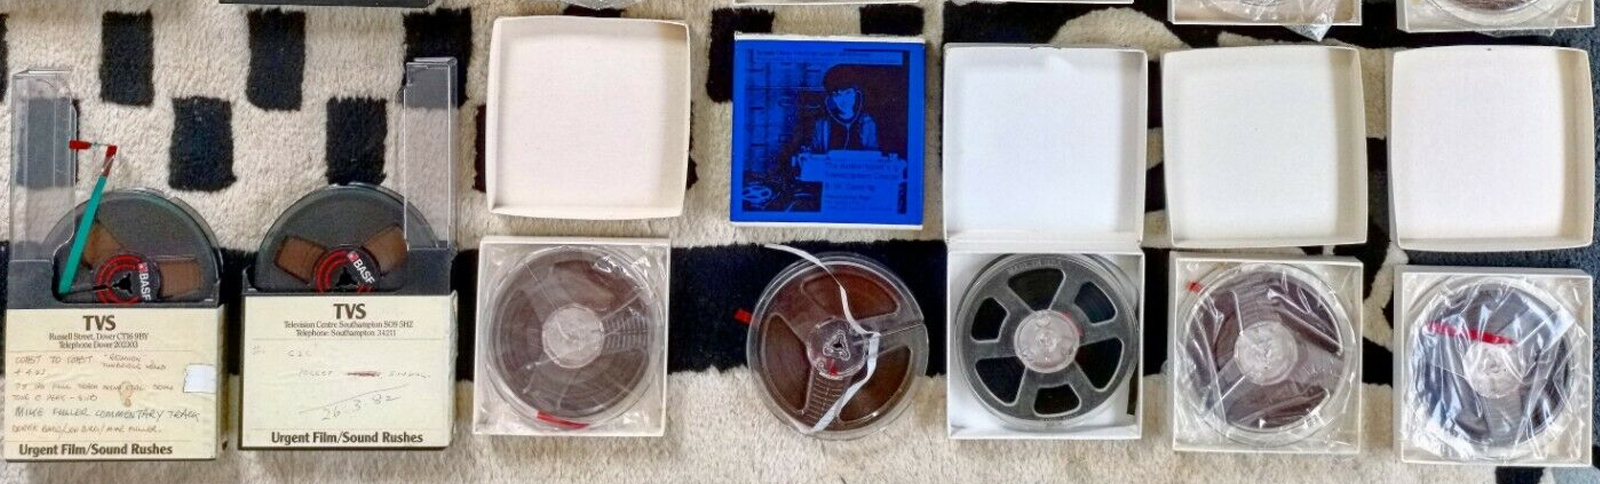 Domestic Family 1/4 Audio Reel to Reel Tape Transfers  Oxford UK Audio  Duplication at Oxford Duplication Centre